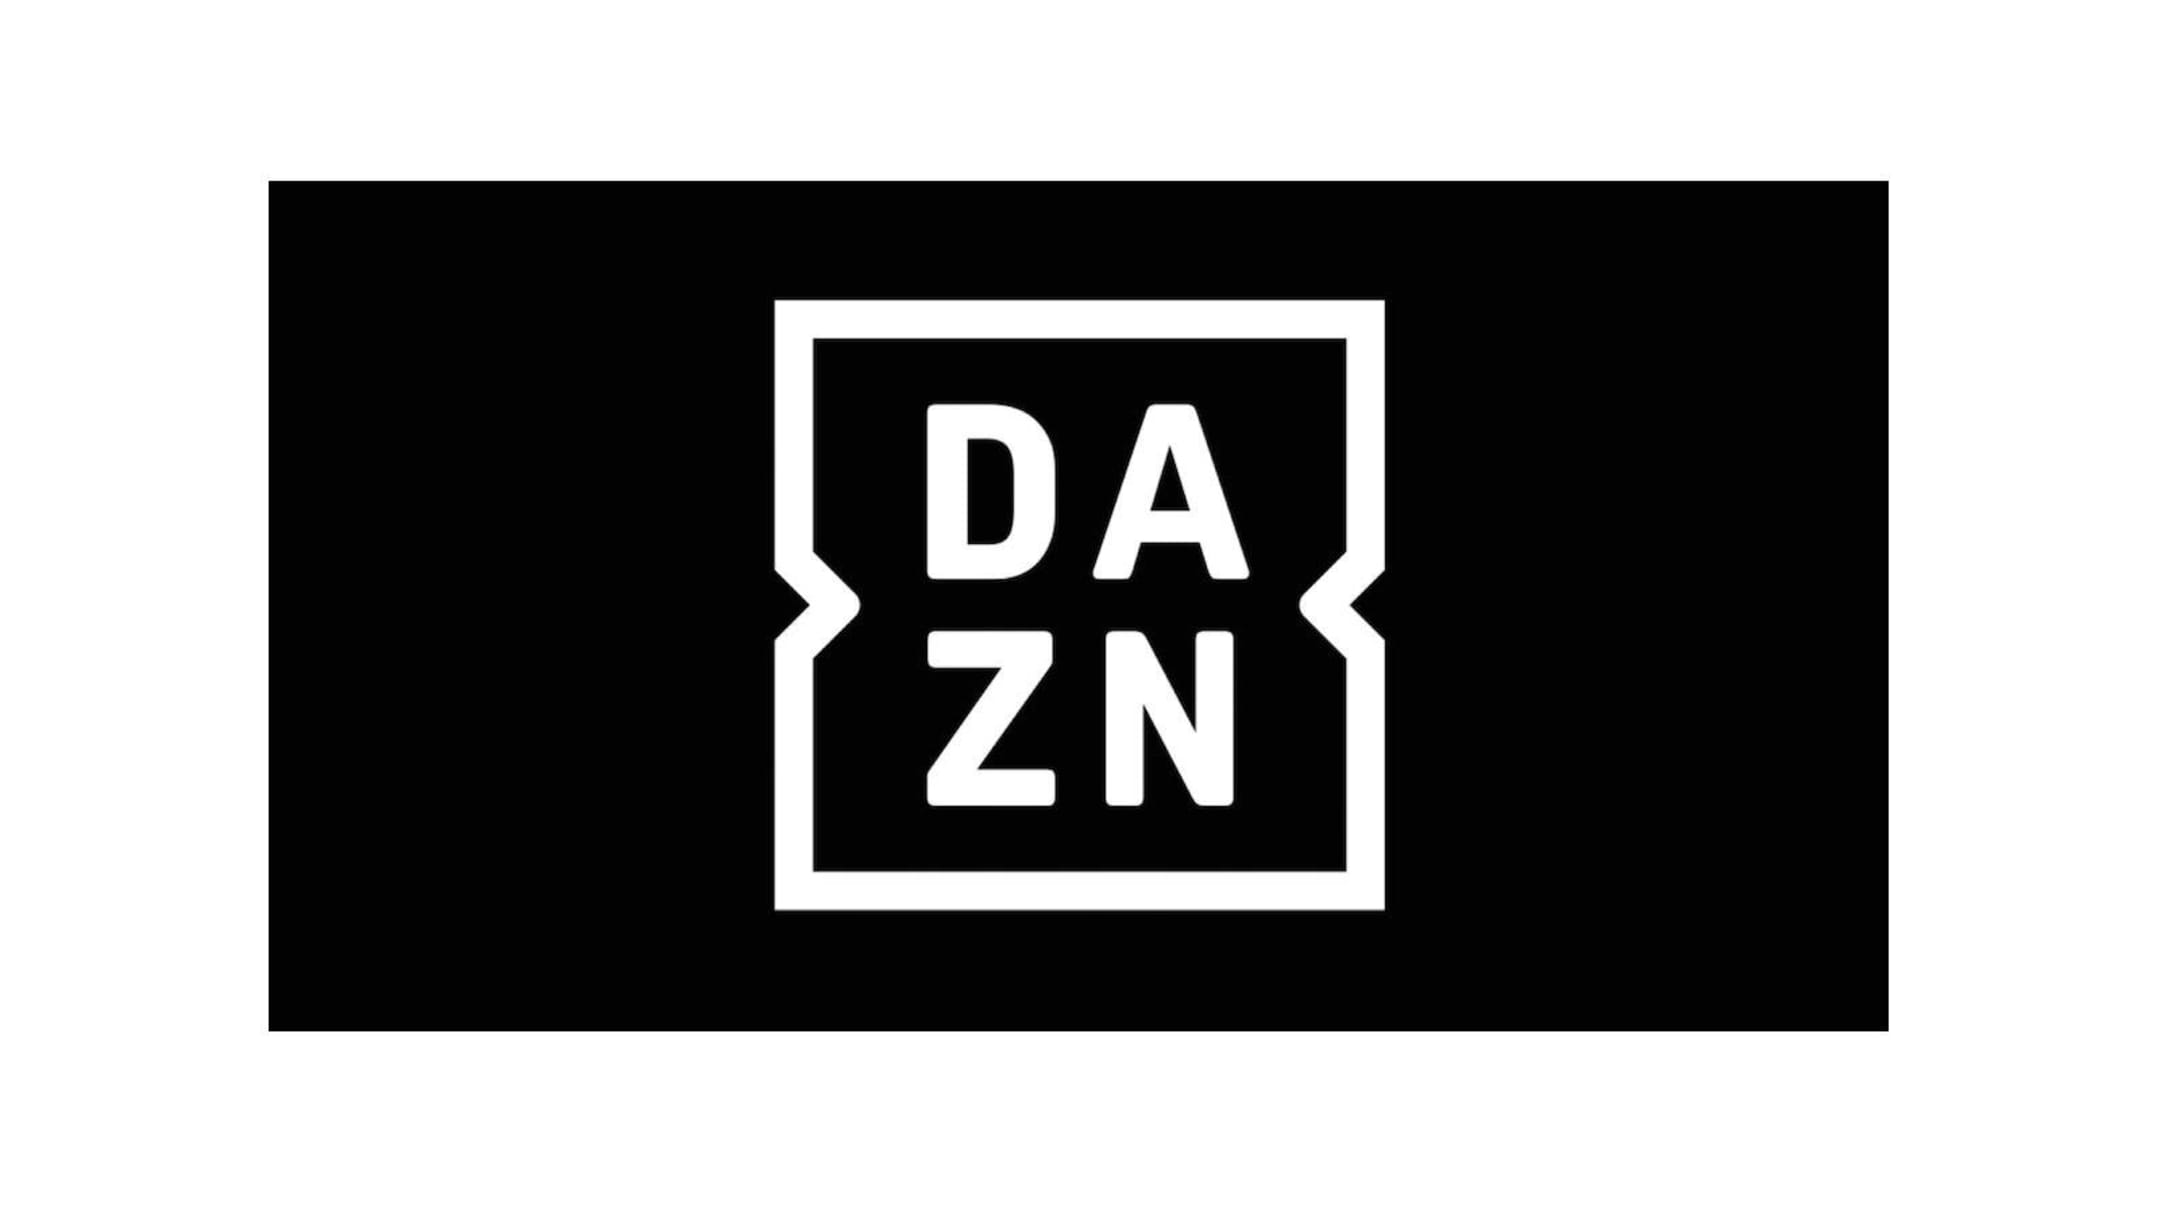 Streaming sports on DAZN? Here's what you need to know - GetConnected